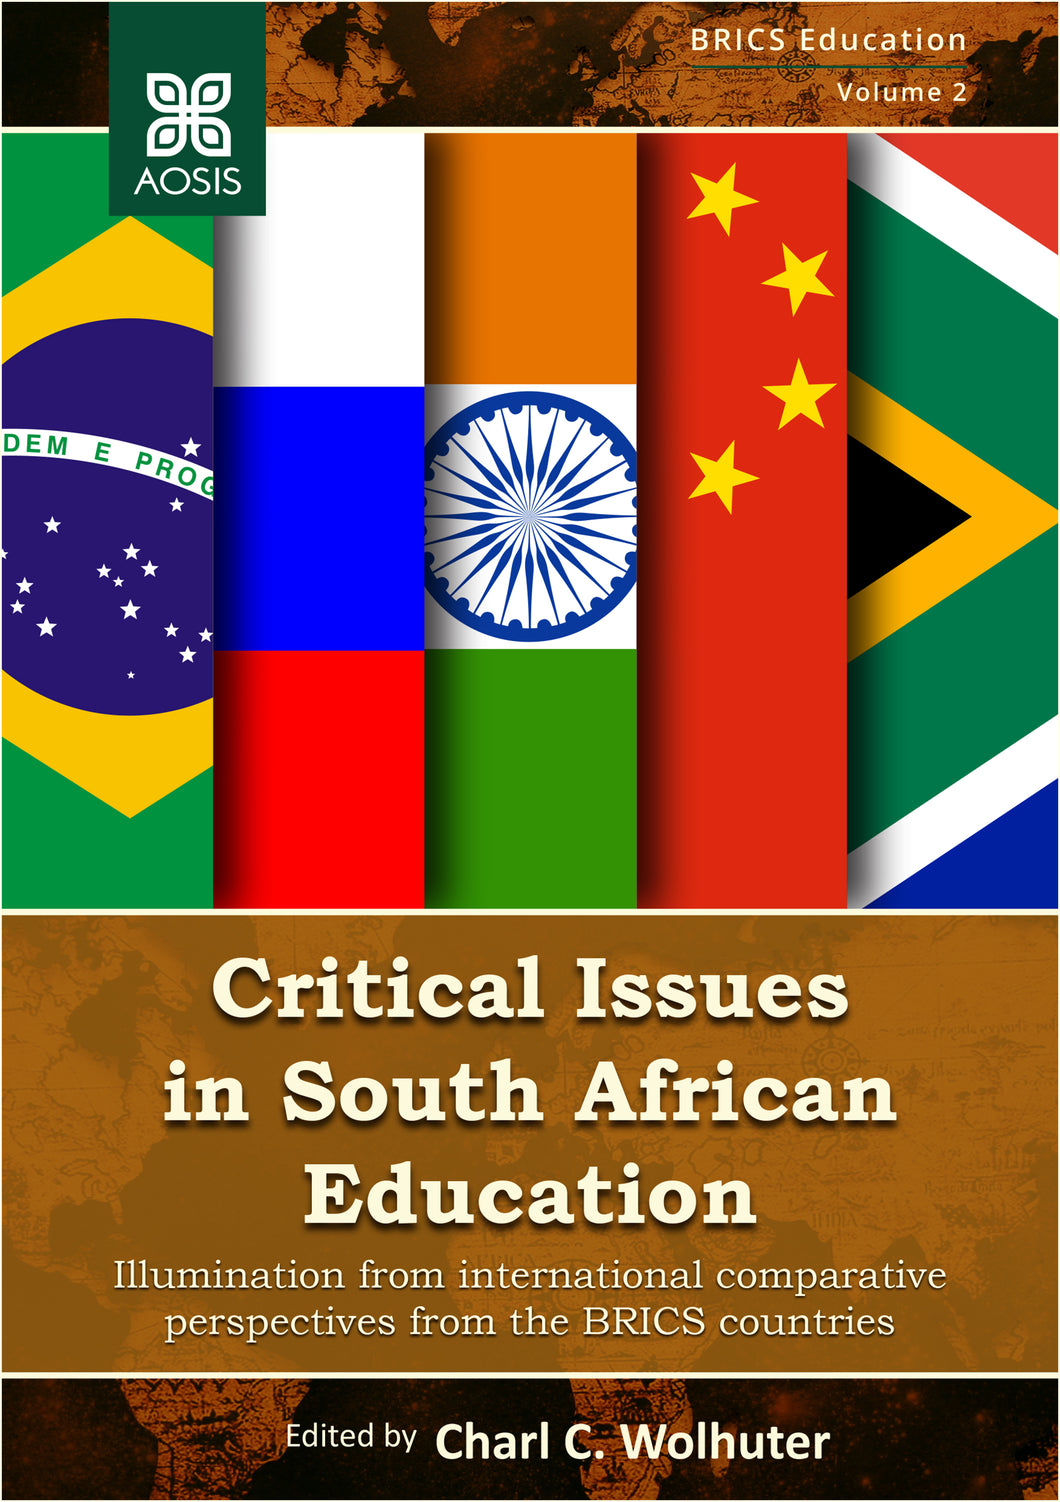 Critical Issues in South African Education: Illumination from international comparative perspectives from the BRICS countries (Print copy)